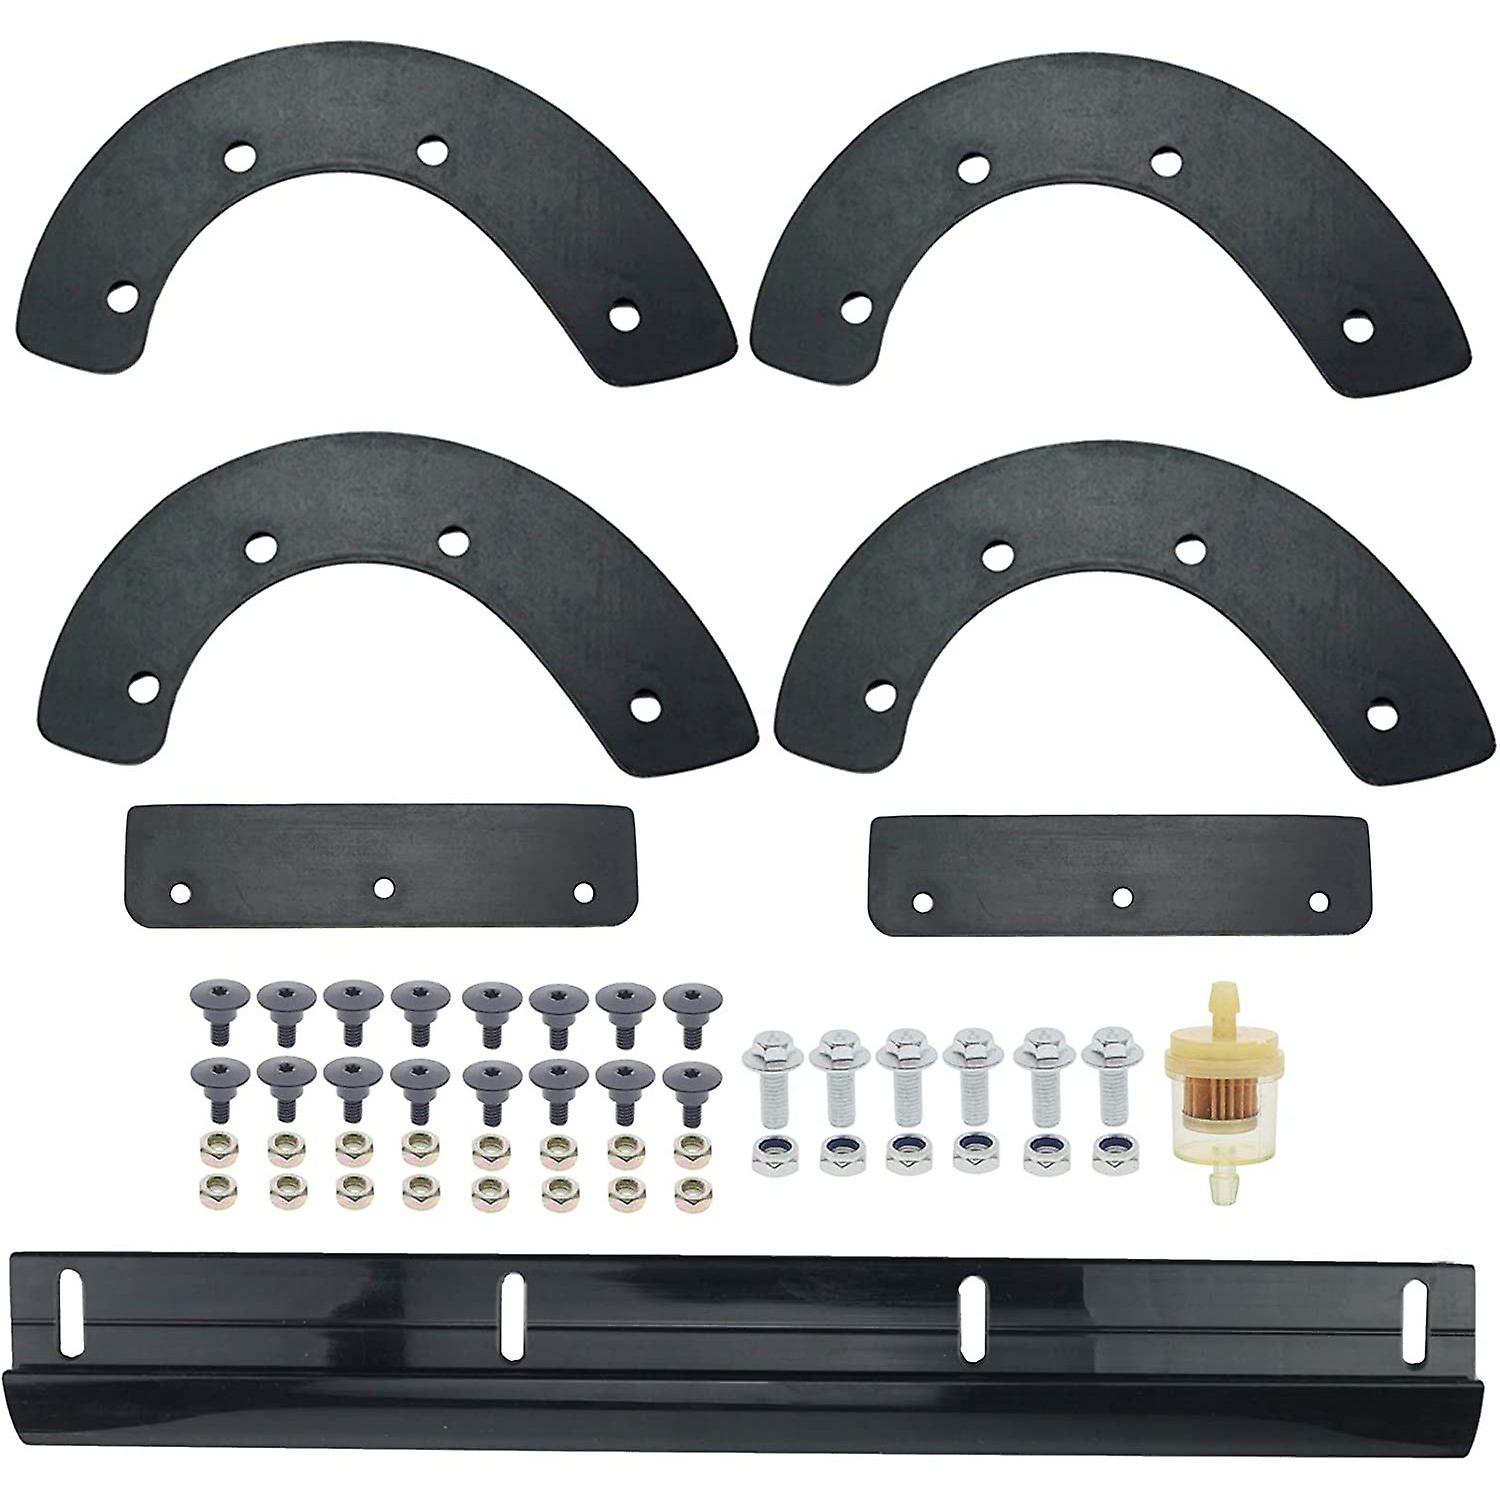 Paddles And Scraper Set For Honda Snowblower 72523-747-000 72522-747-000 72521-747-000 Replace Hs521 Hs561 Snow Blower With Hardware Kit